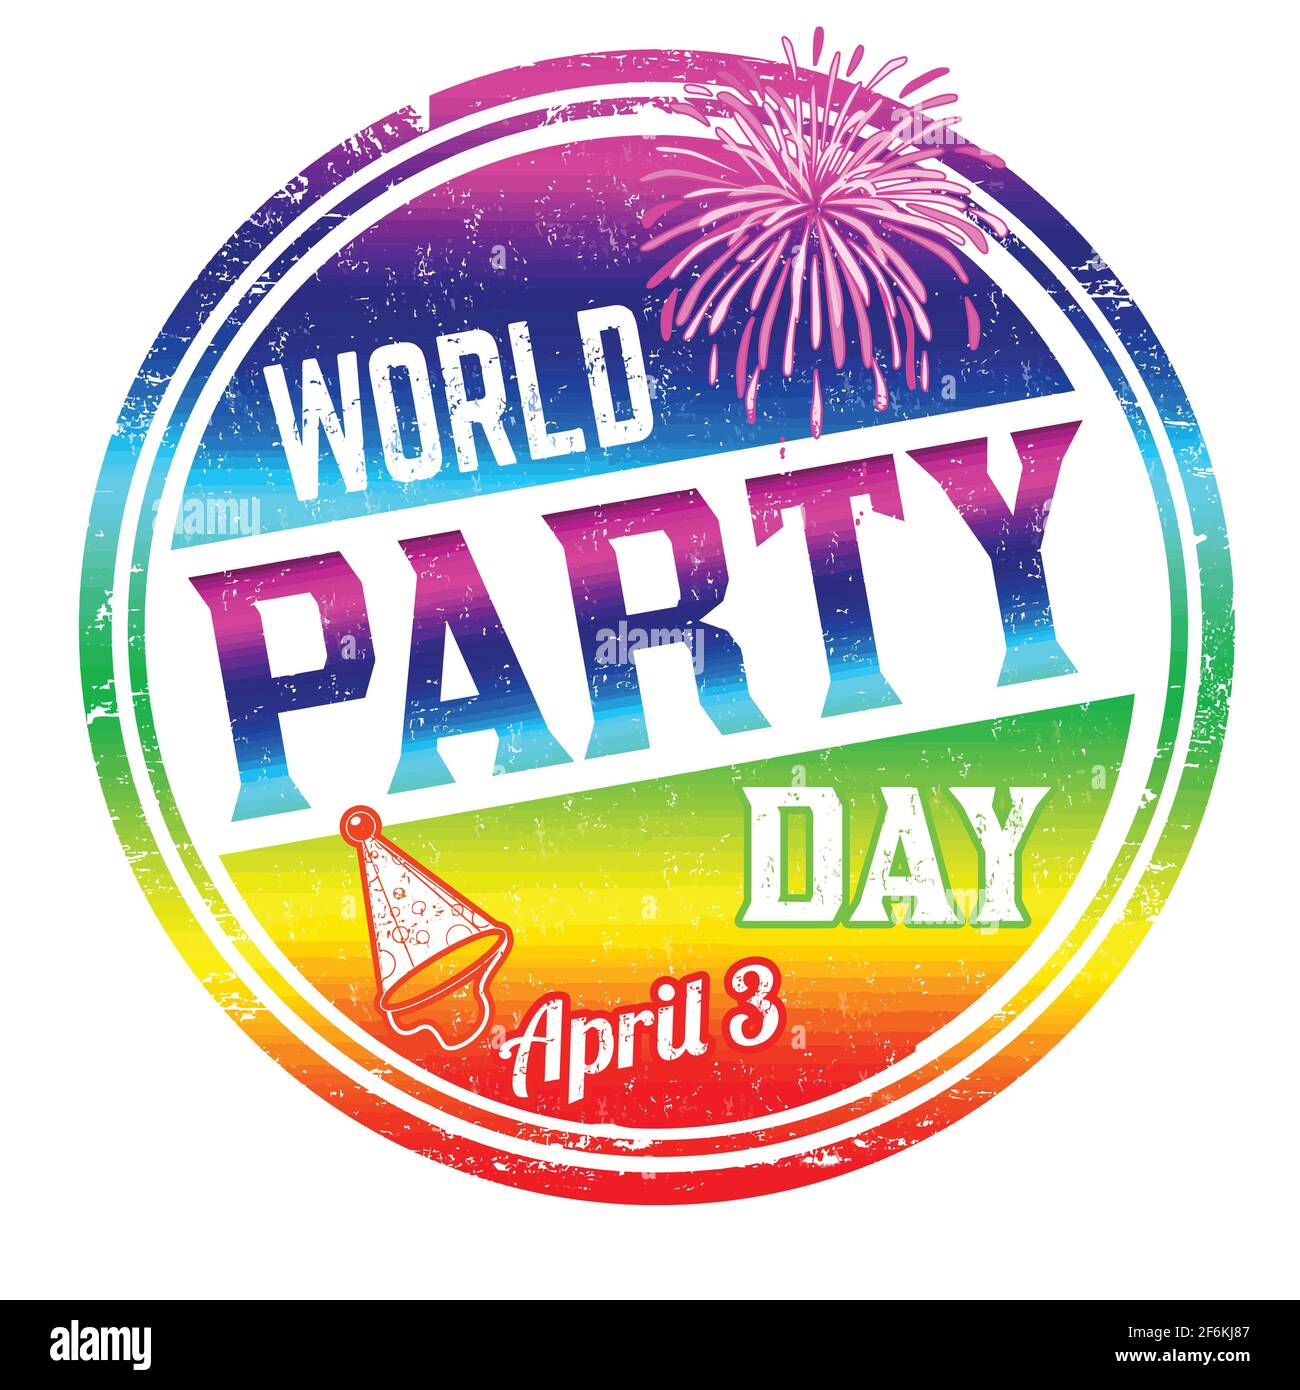 World party day grunge rubber stamp on white background, vector illustration Stock Vector